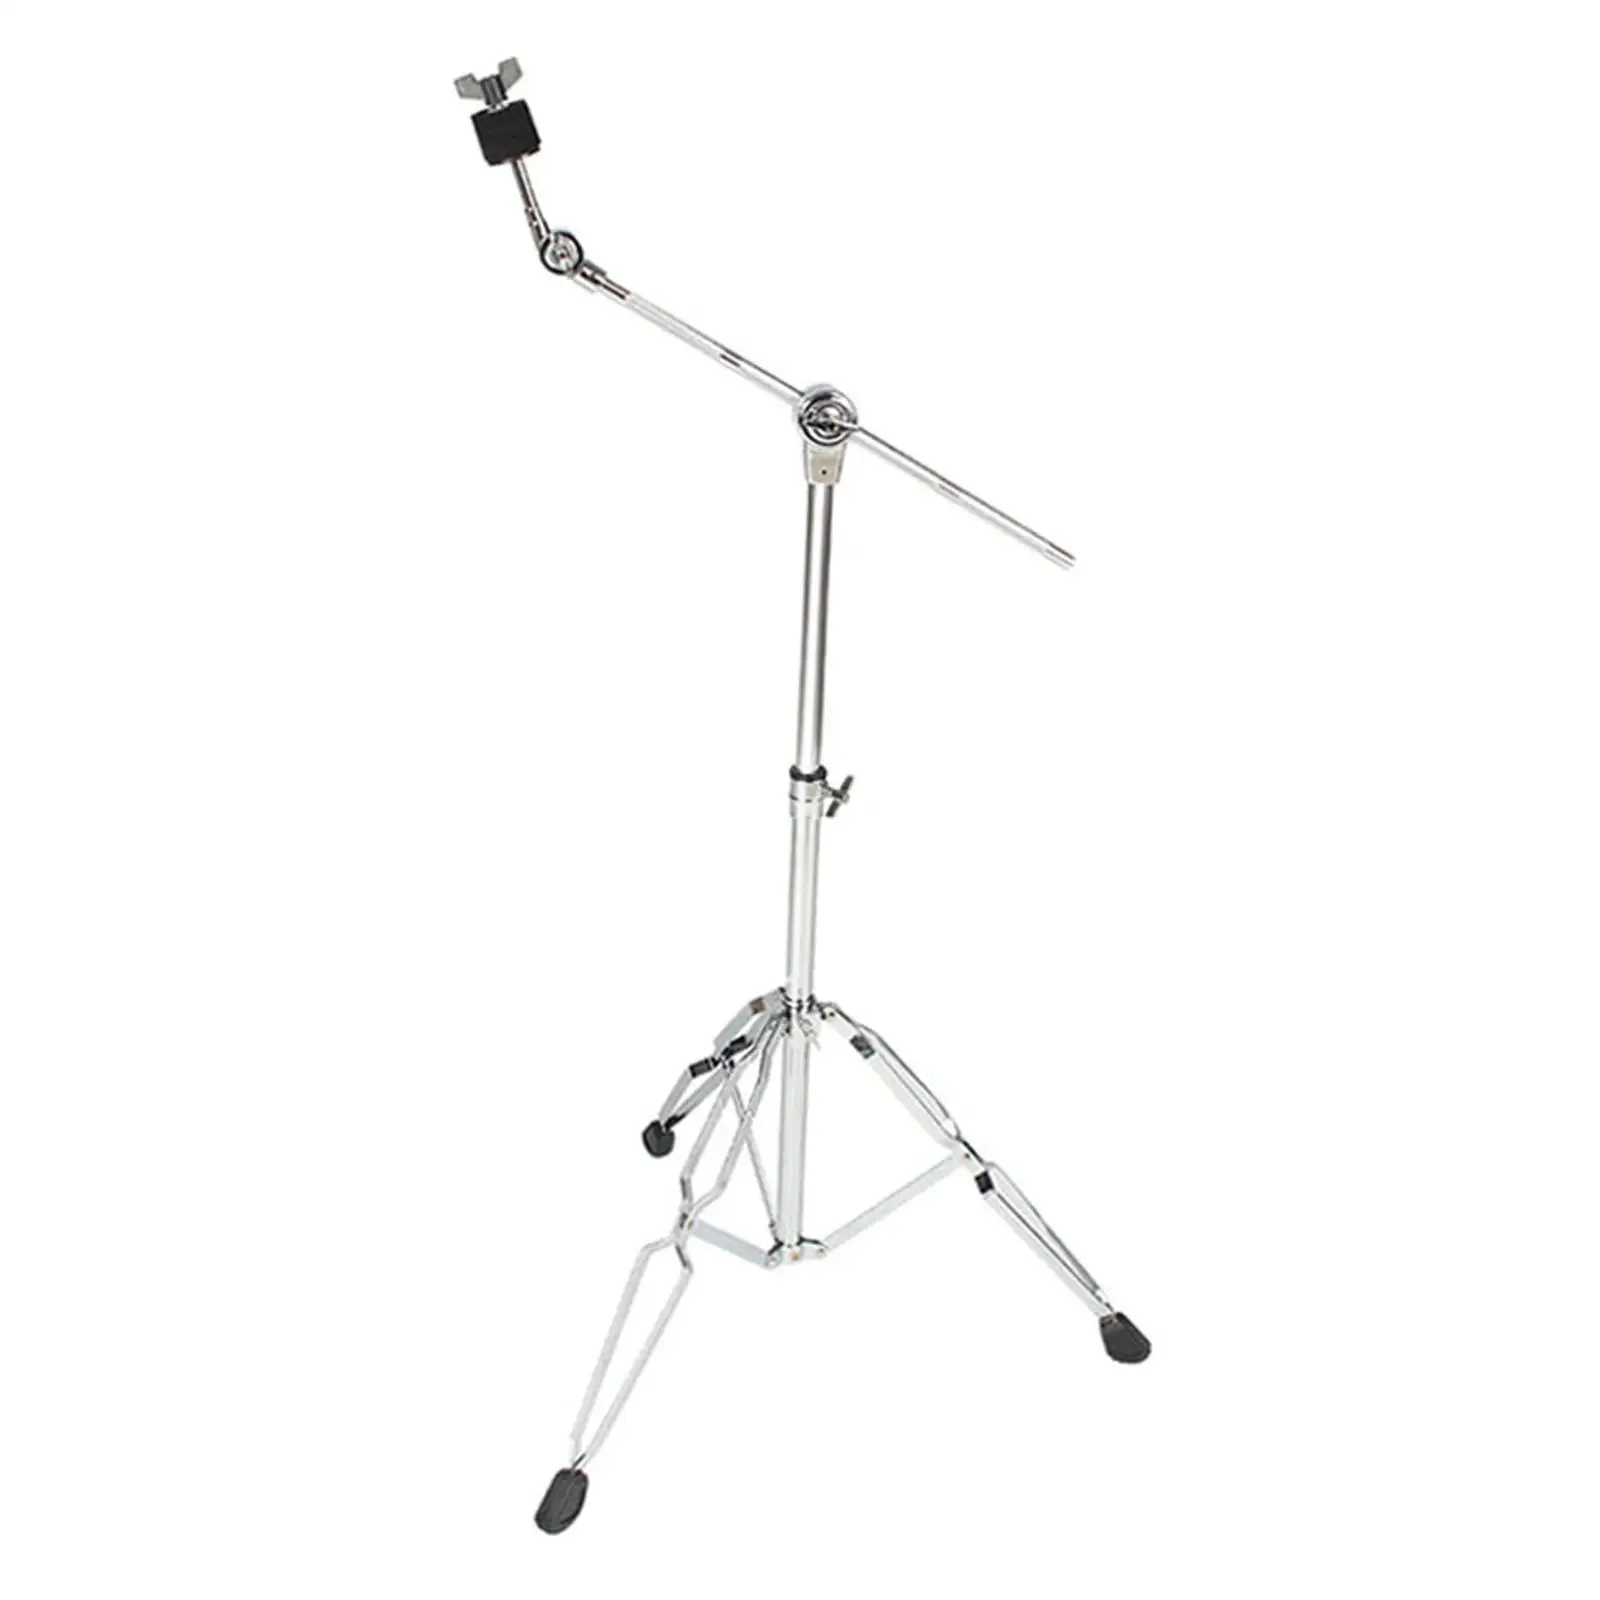 Cymbal Stand Adjustable Foldable Full Metal Universal Stable Accessories